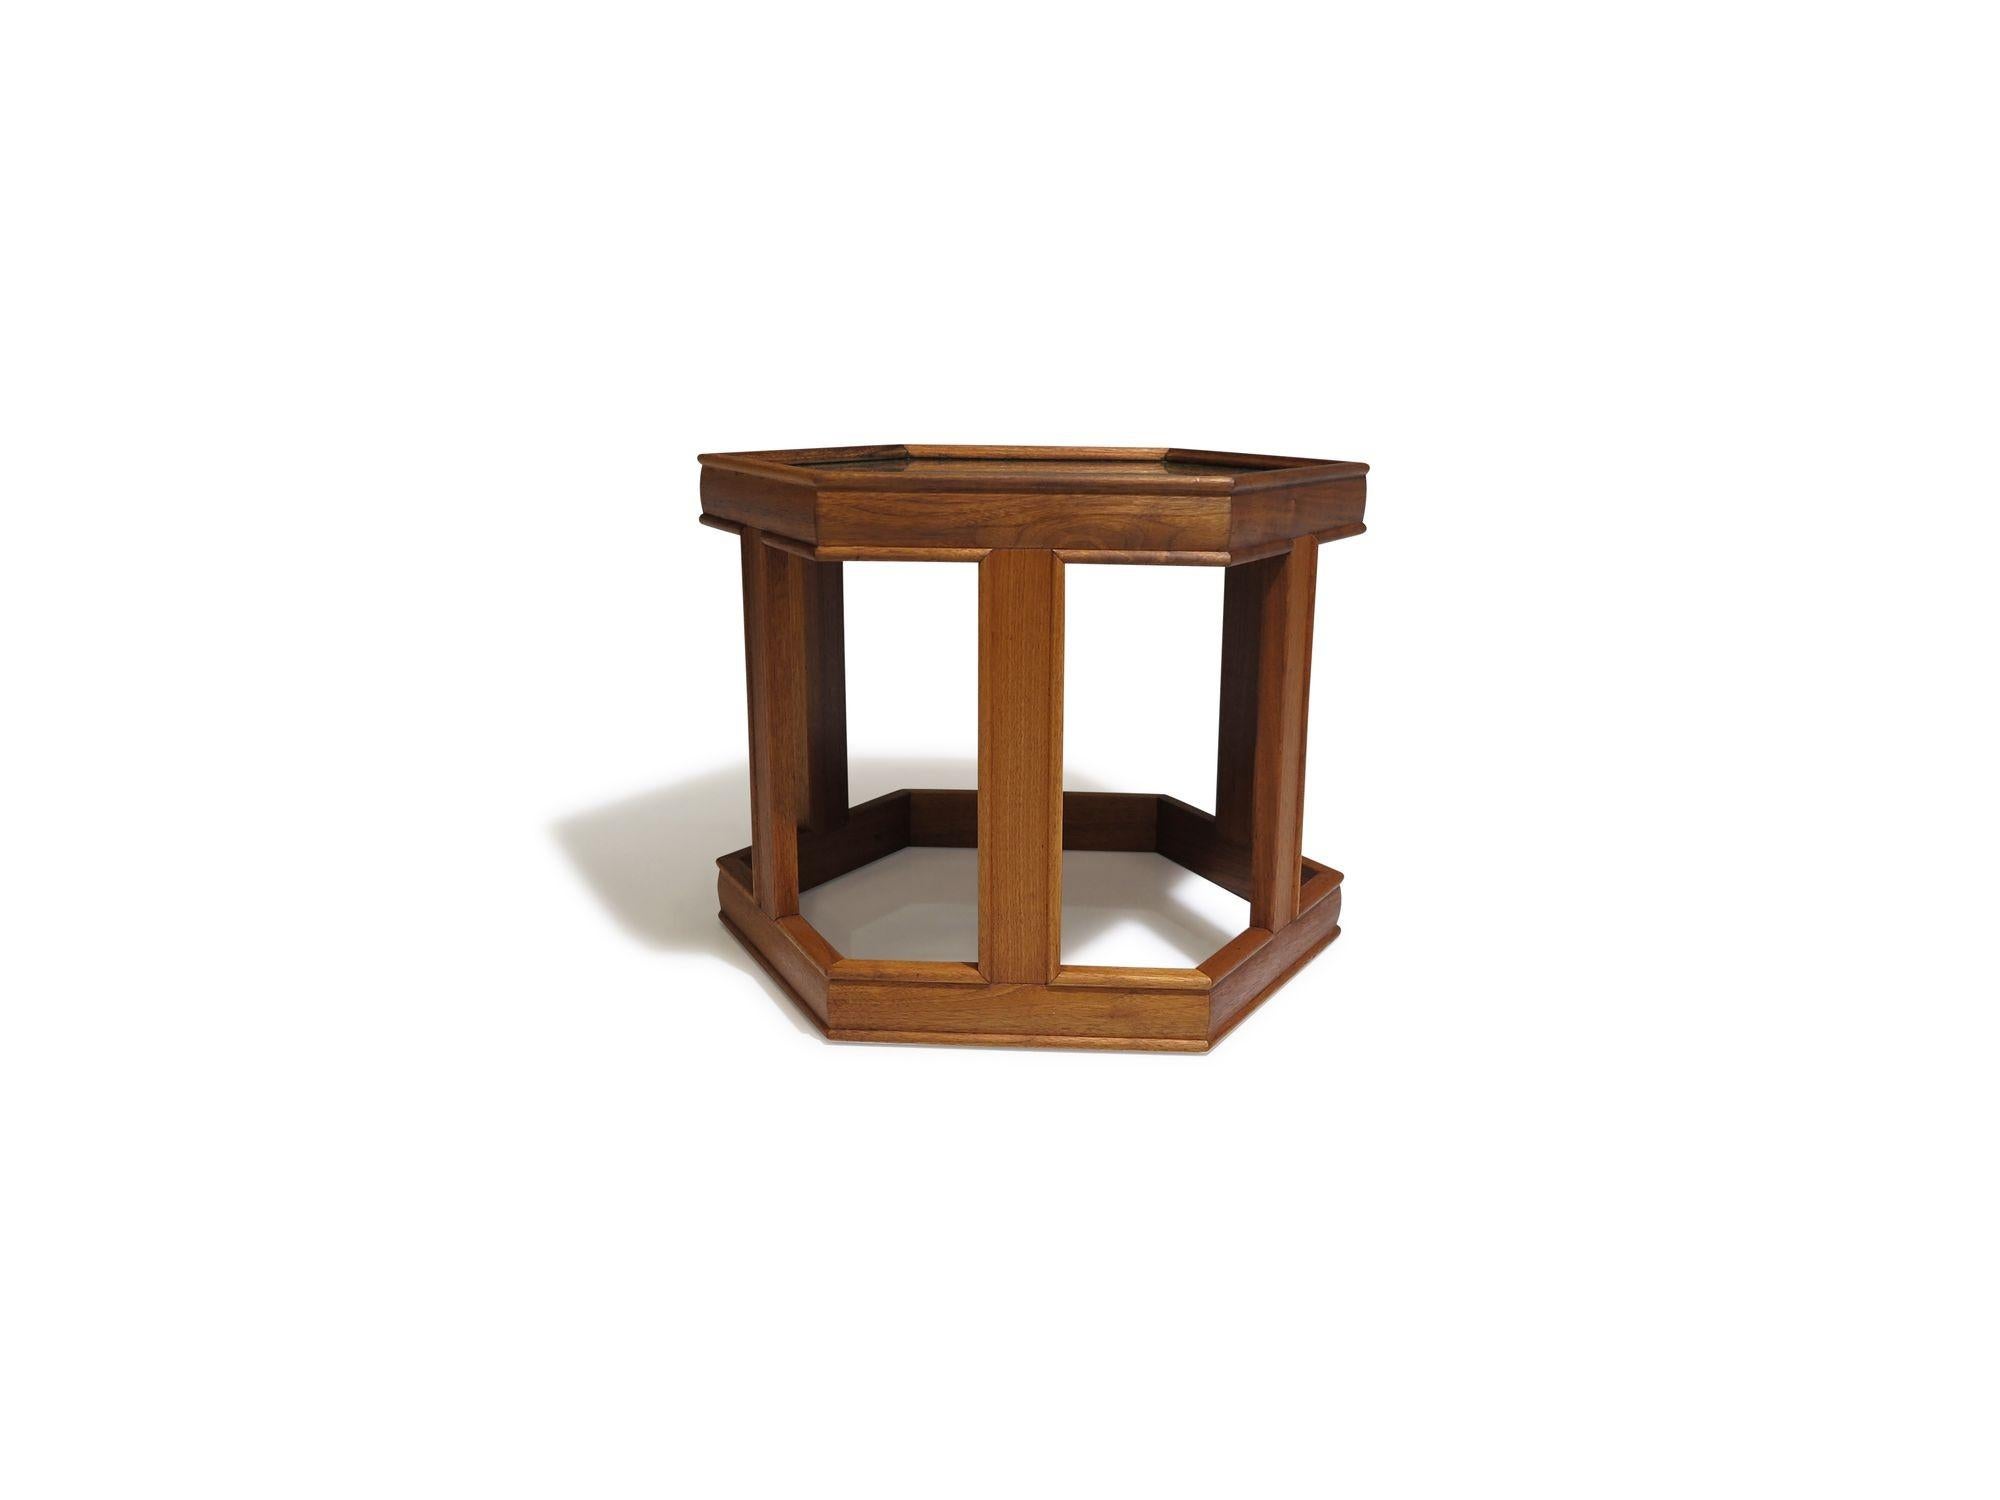 Walnut side tables designed by John Keal for Brown Saltman, circa 1960, United States. Crafted from solid walnut, these tables feature a hexagonal shape with glass surfaces. Fully restored with a natural oil finish, they are in excellent condition